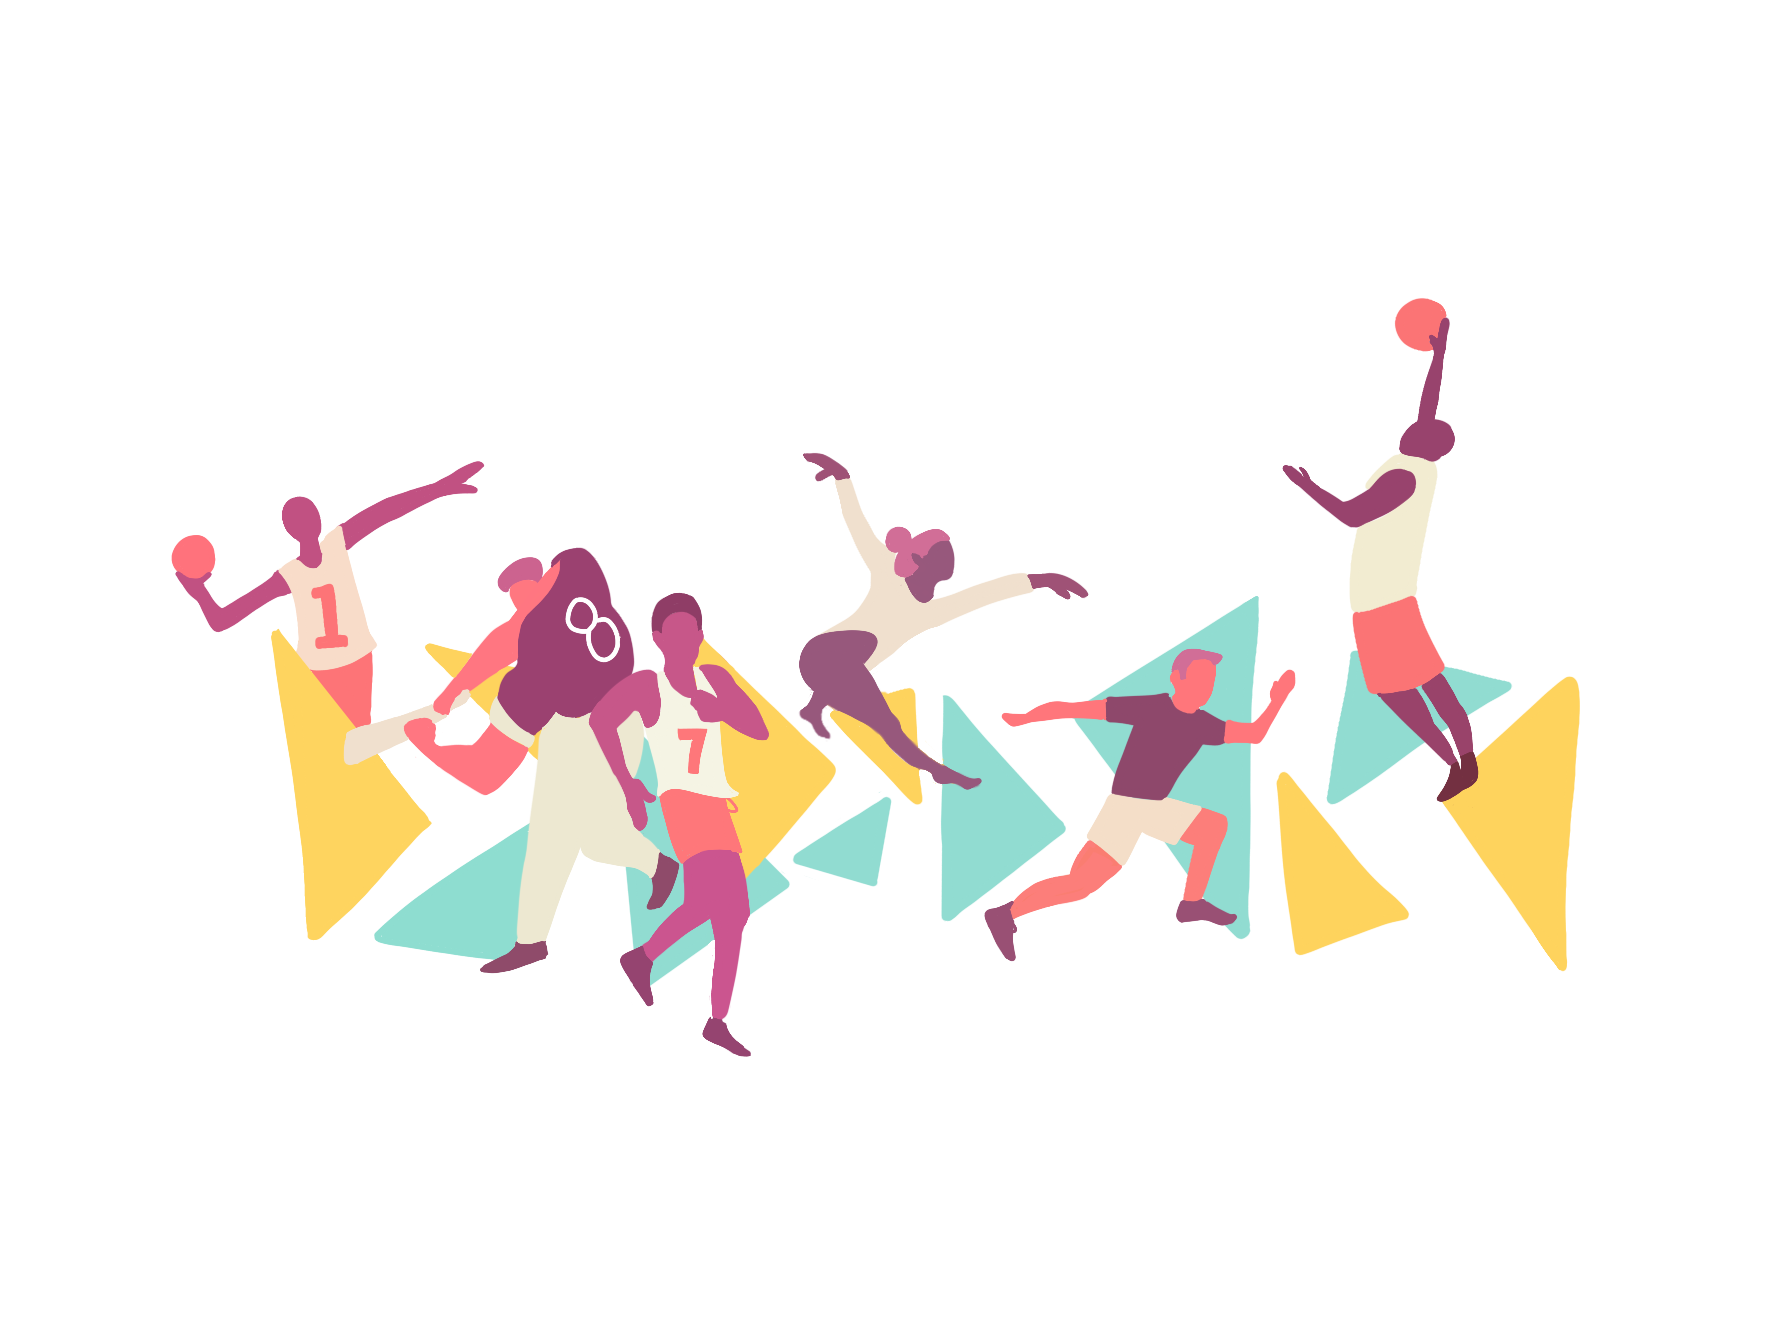 The illustration represents different types of athletes around the world. Members of the Archer community discussed female athletes who inspire them. (Graphic Illustration by Bernice Wong)